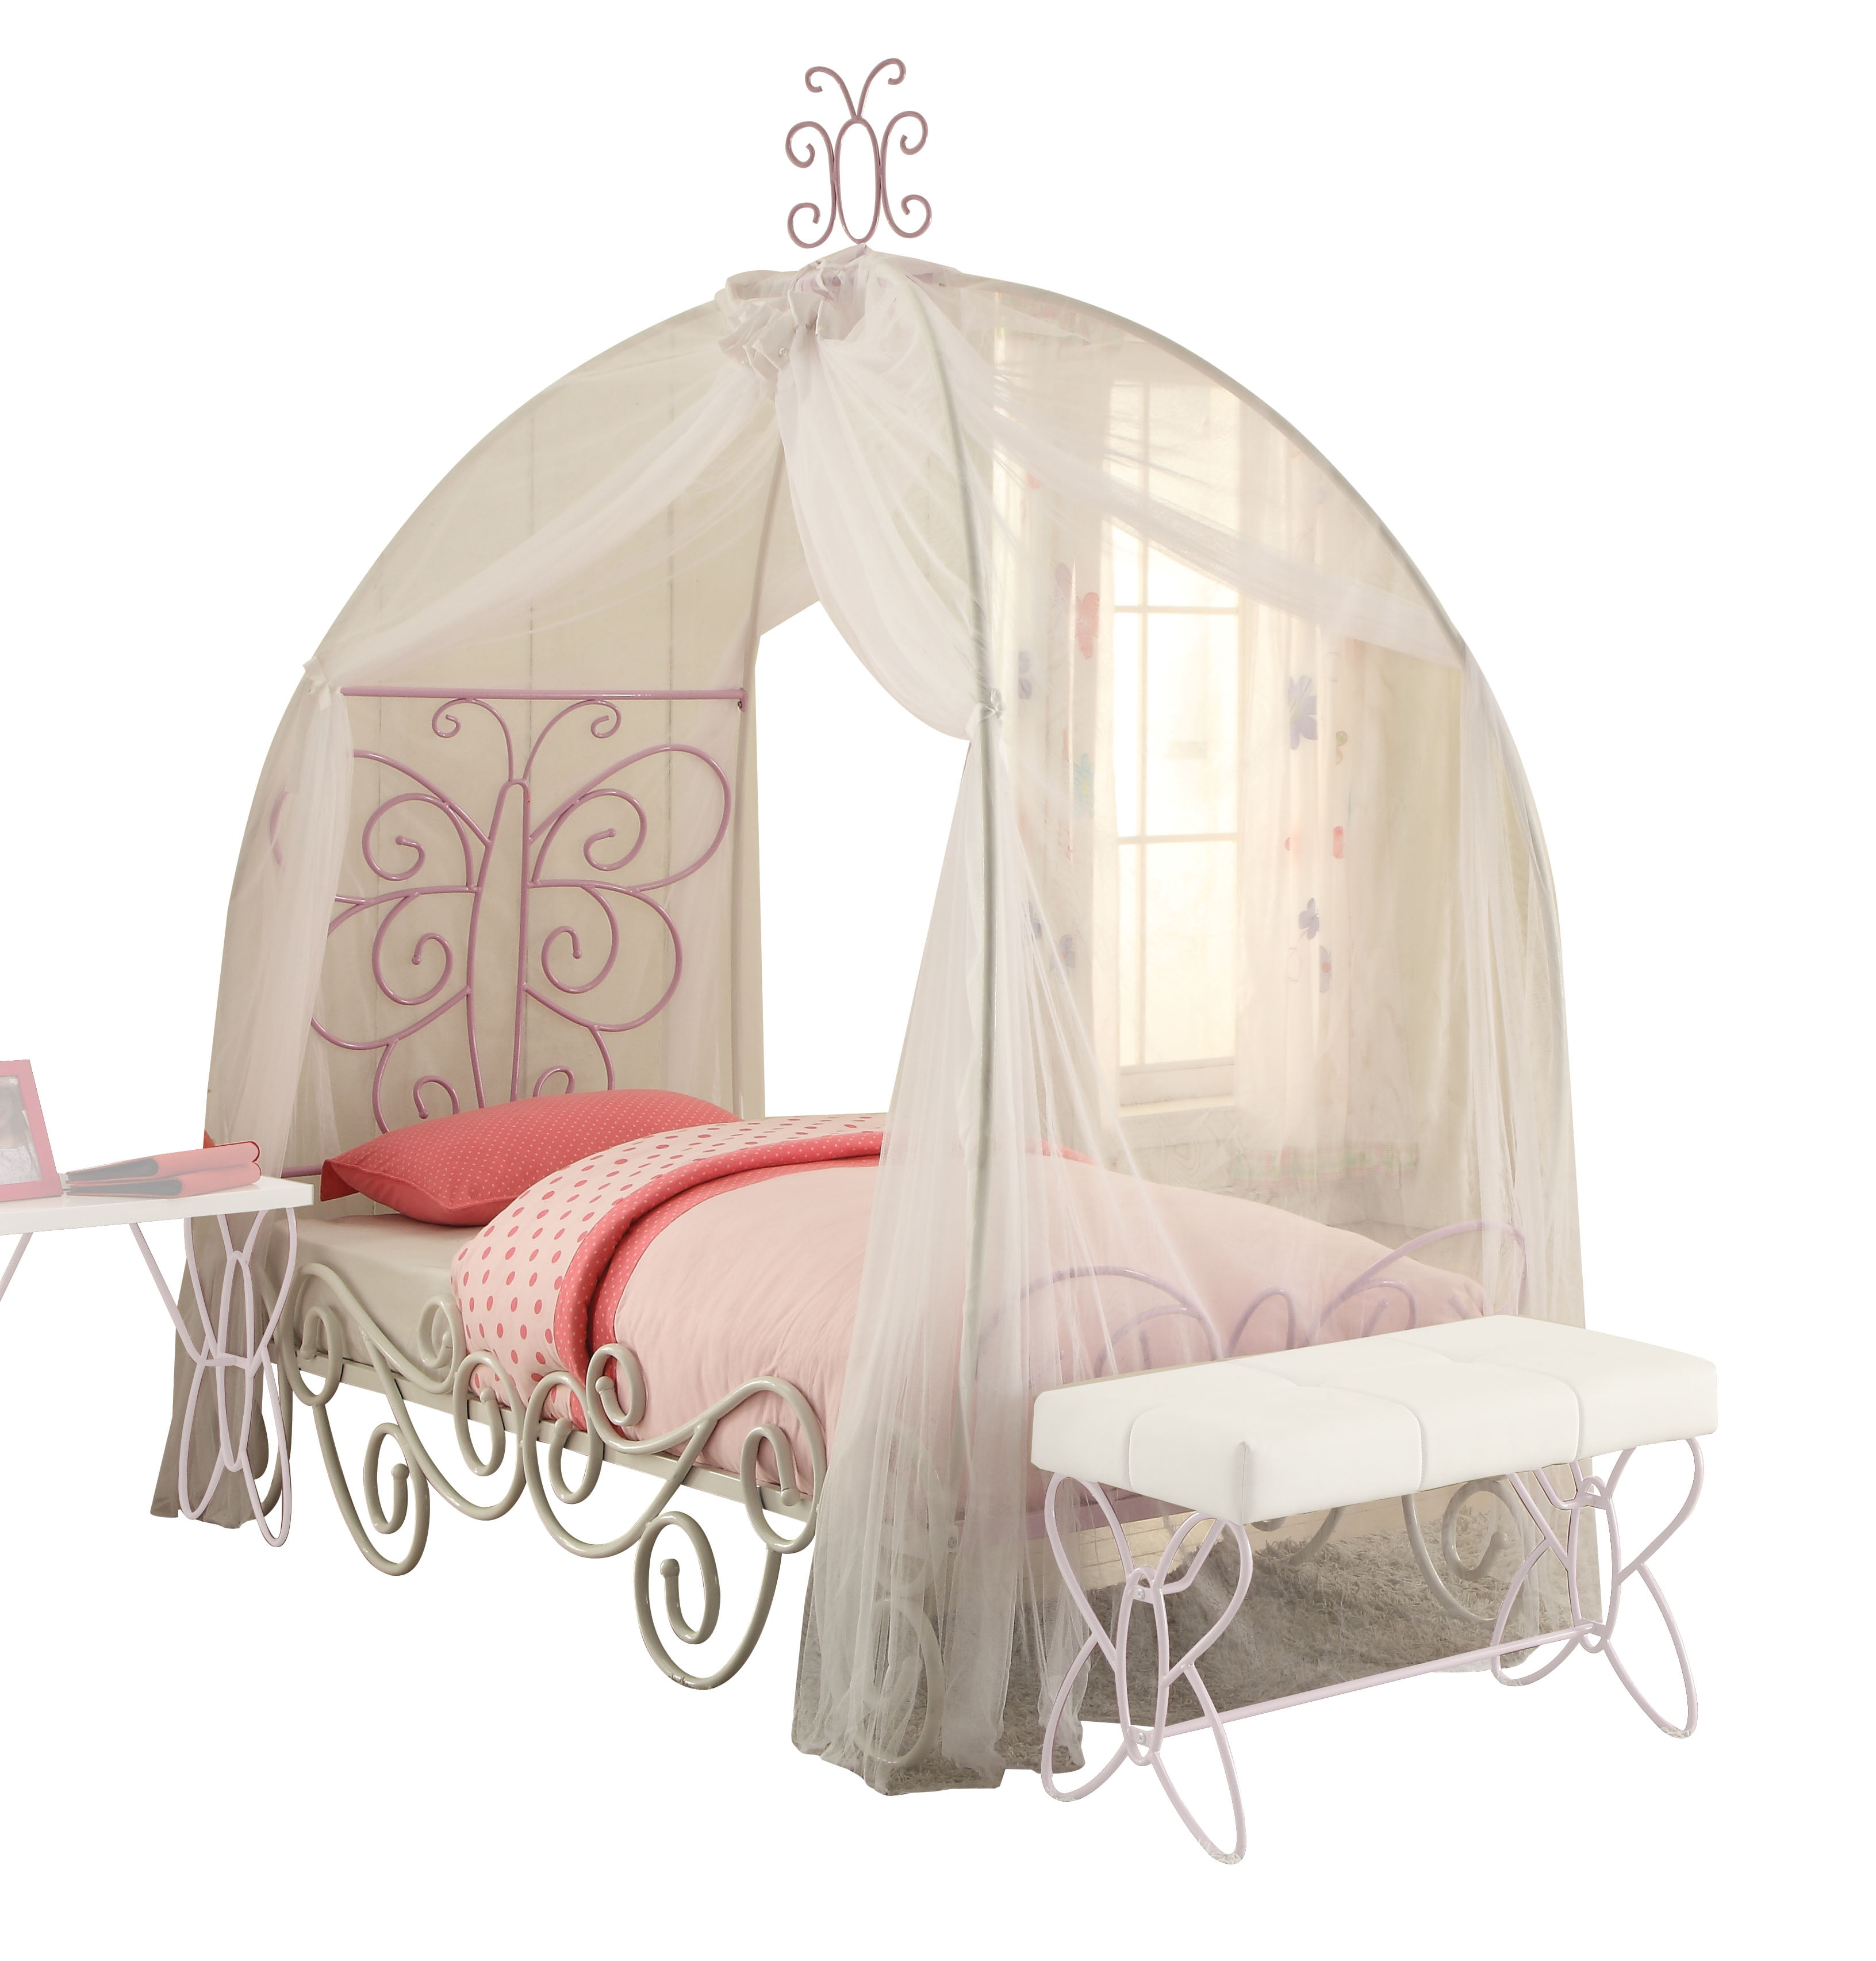 CANOPY HOLDER COT/COT BED CANOPY DRAPE LOVELY  BABY Swingging CRIB 